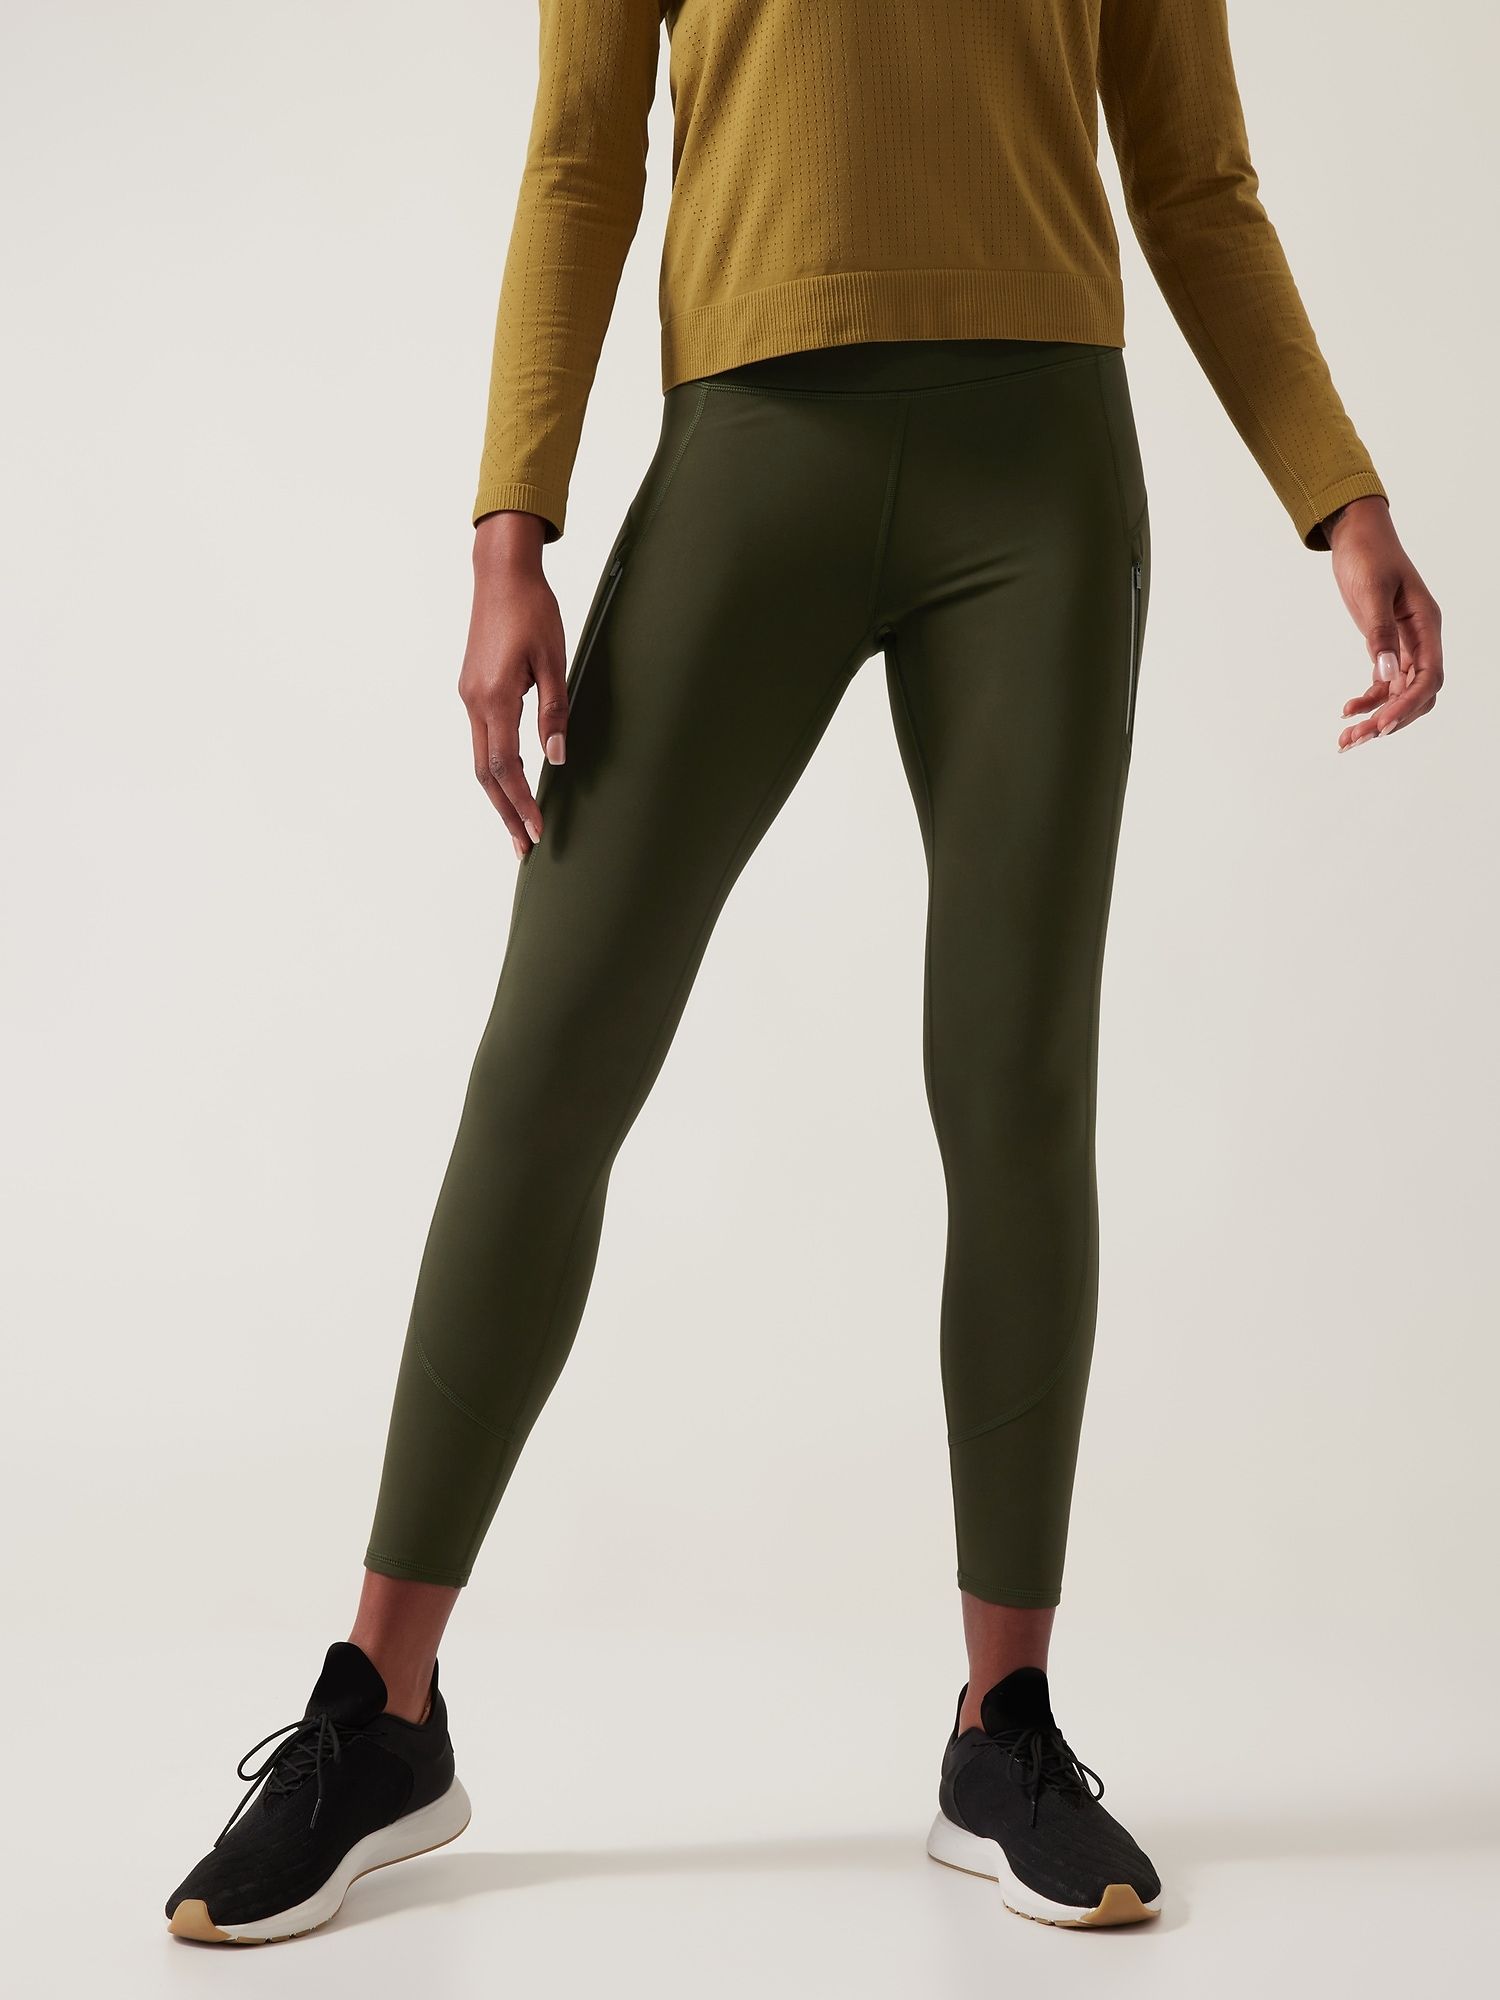 13 Best Fleece Lined Tights, Leggings For Winter | Checkout – Best Deals,  Expert Product Reviews & Buying Guides